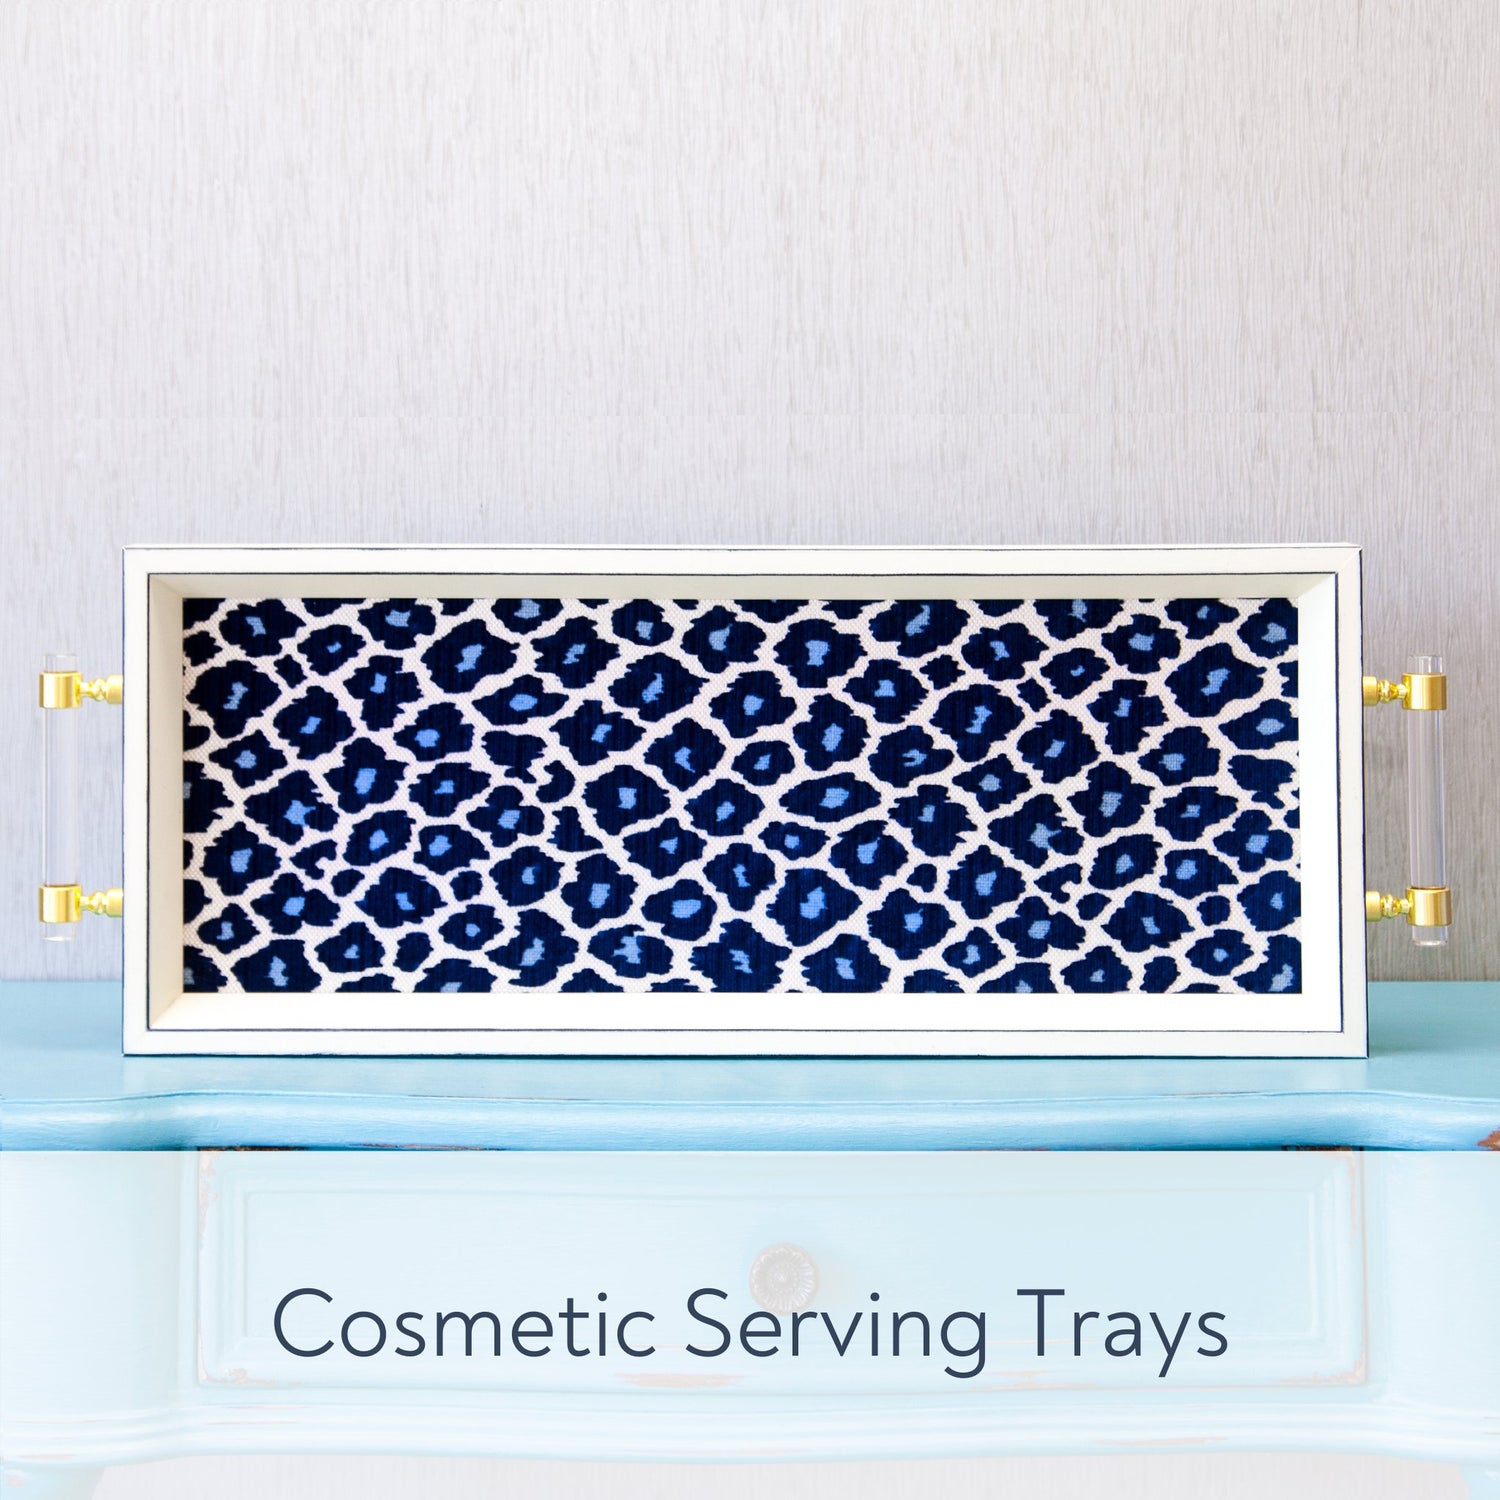 Cosmetic Serving Trays